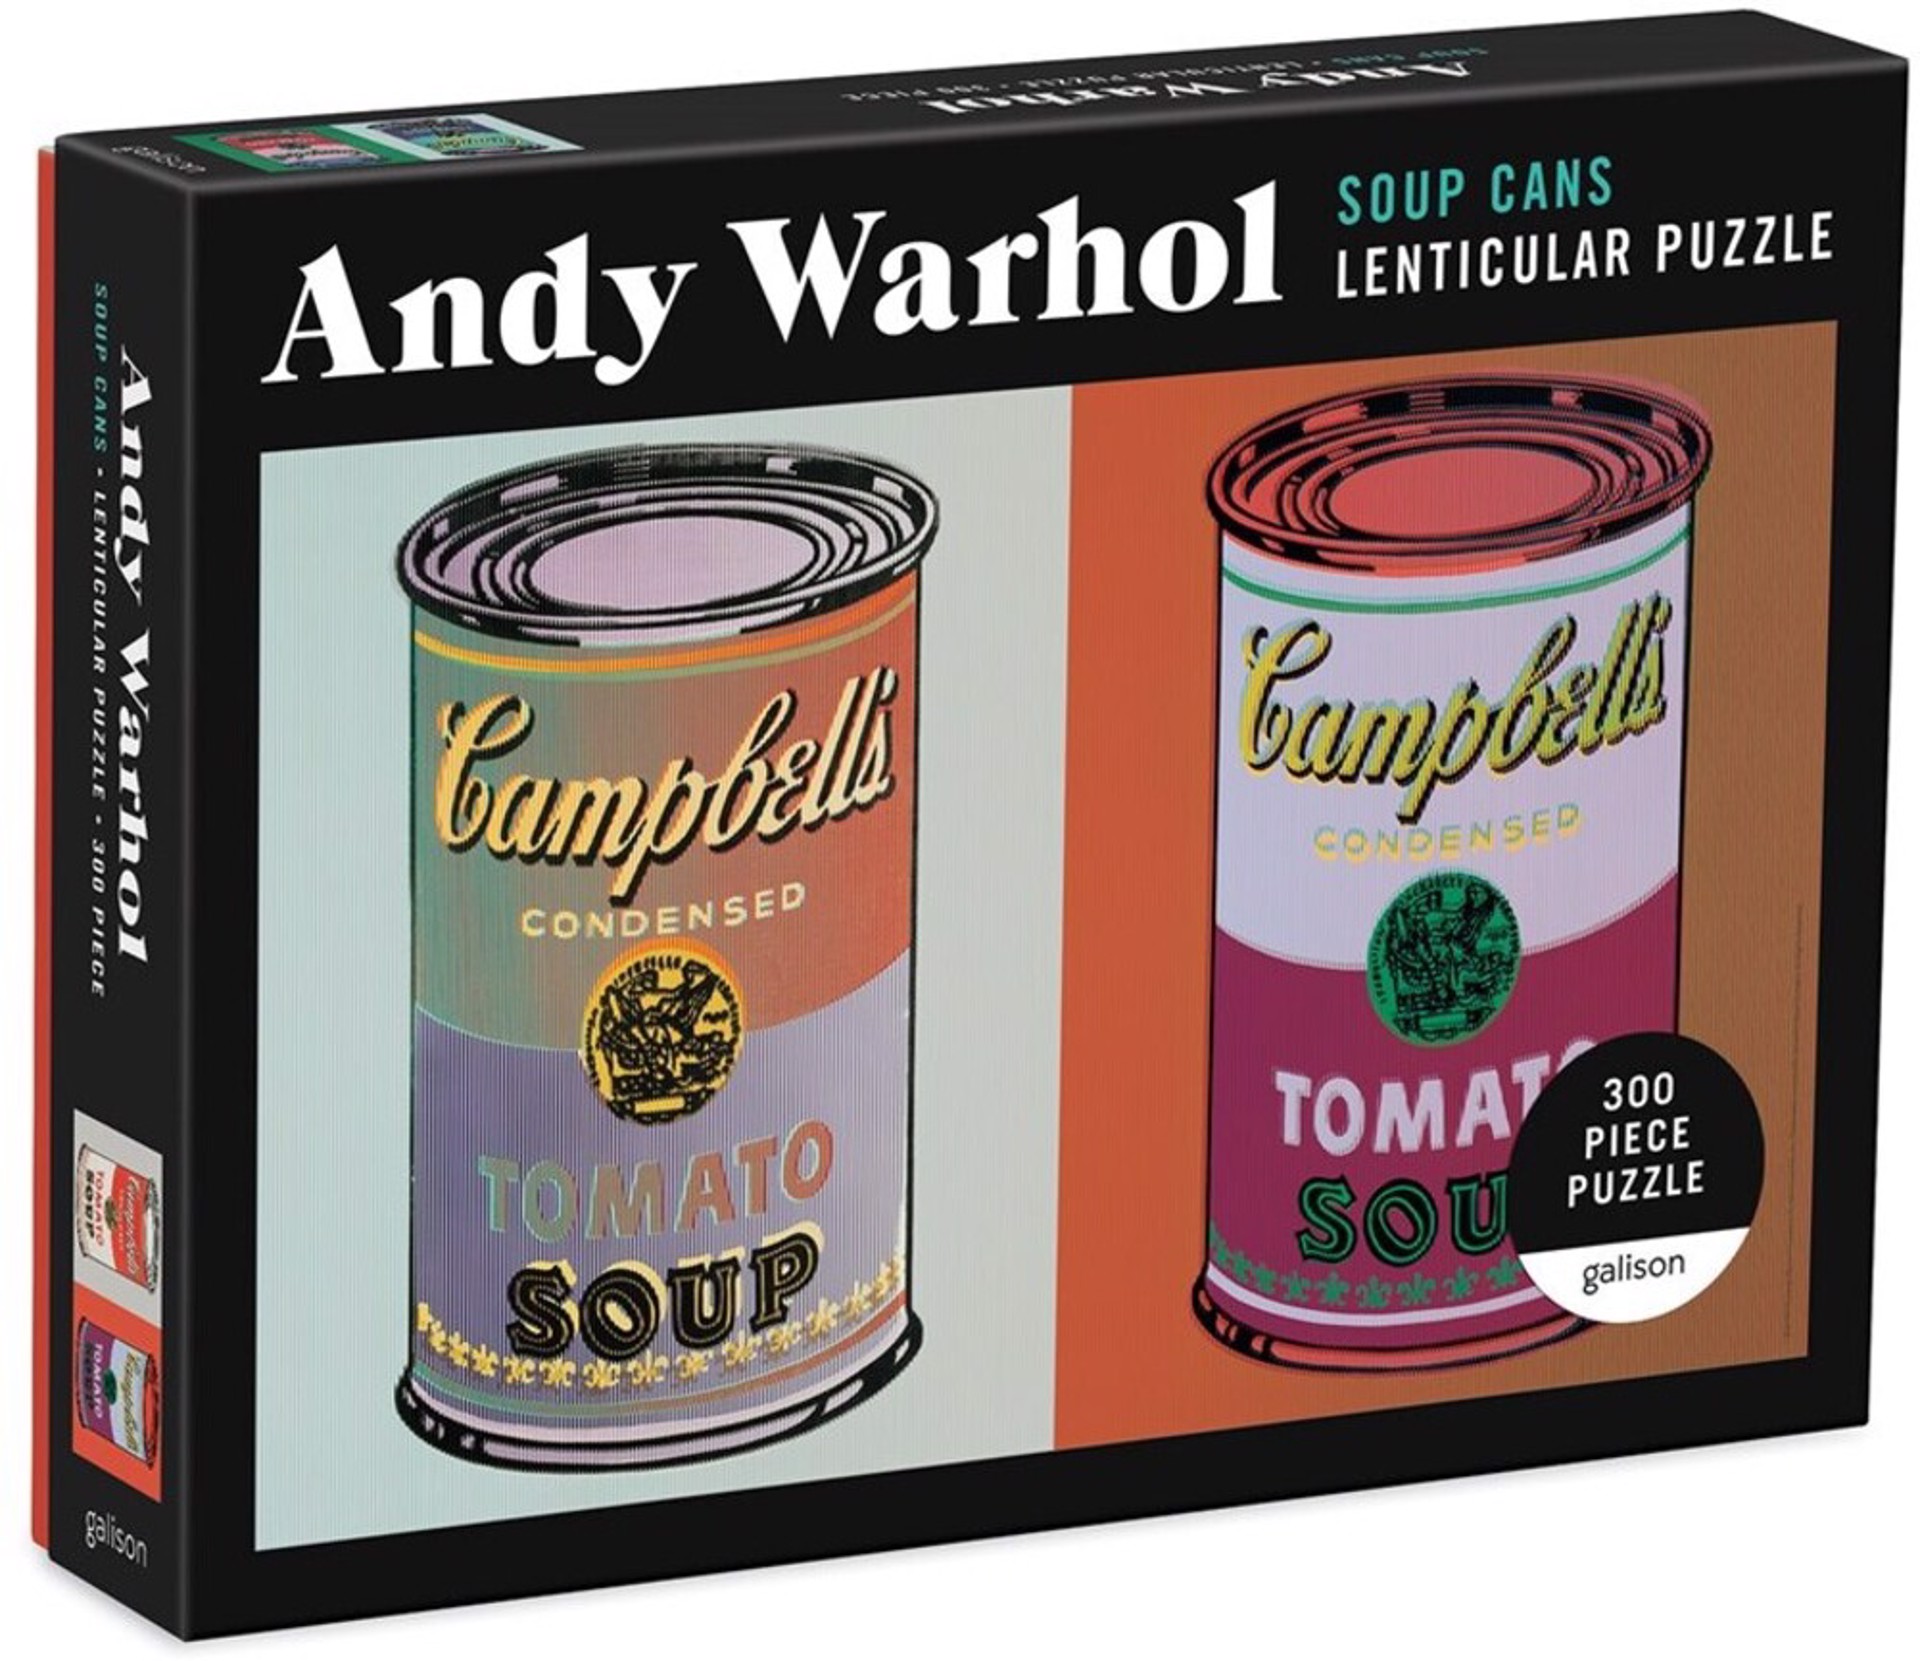 Andy Warhol Soup Cans 300 Piece Lenticular Puzzle by Andy Warhol